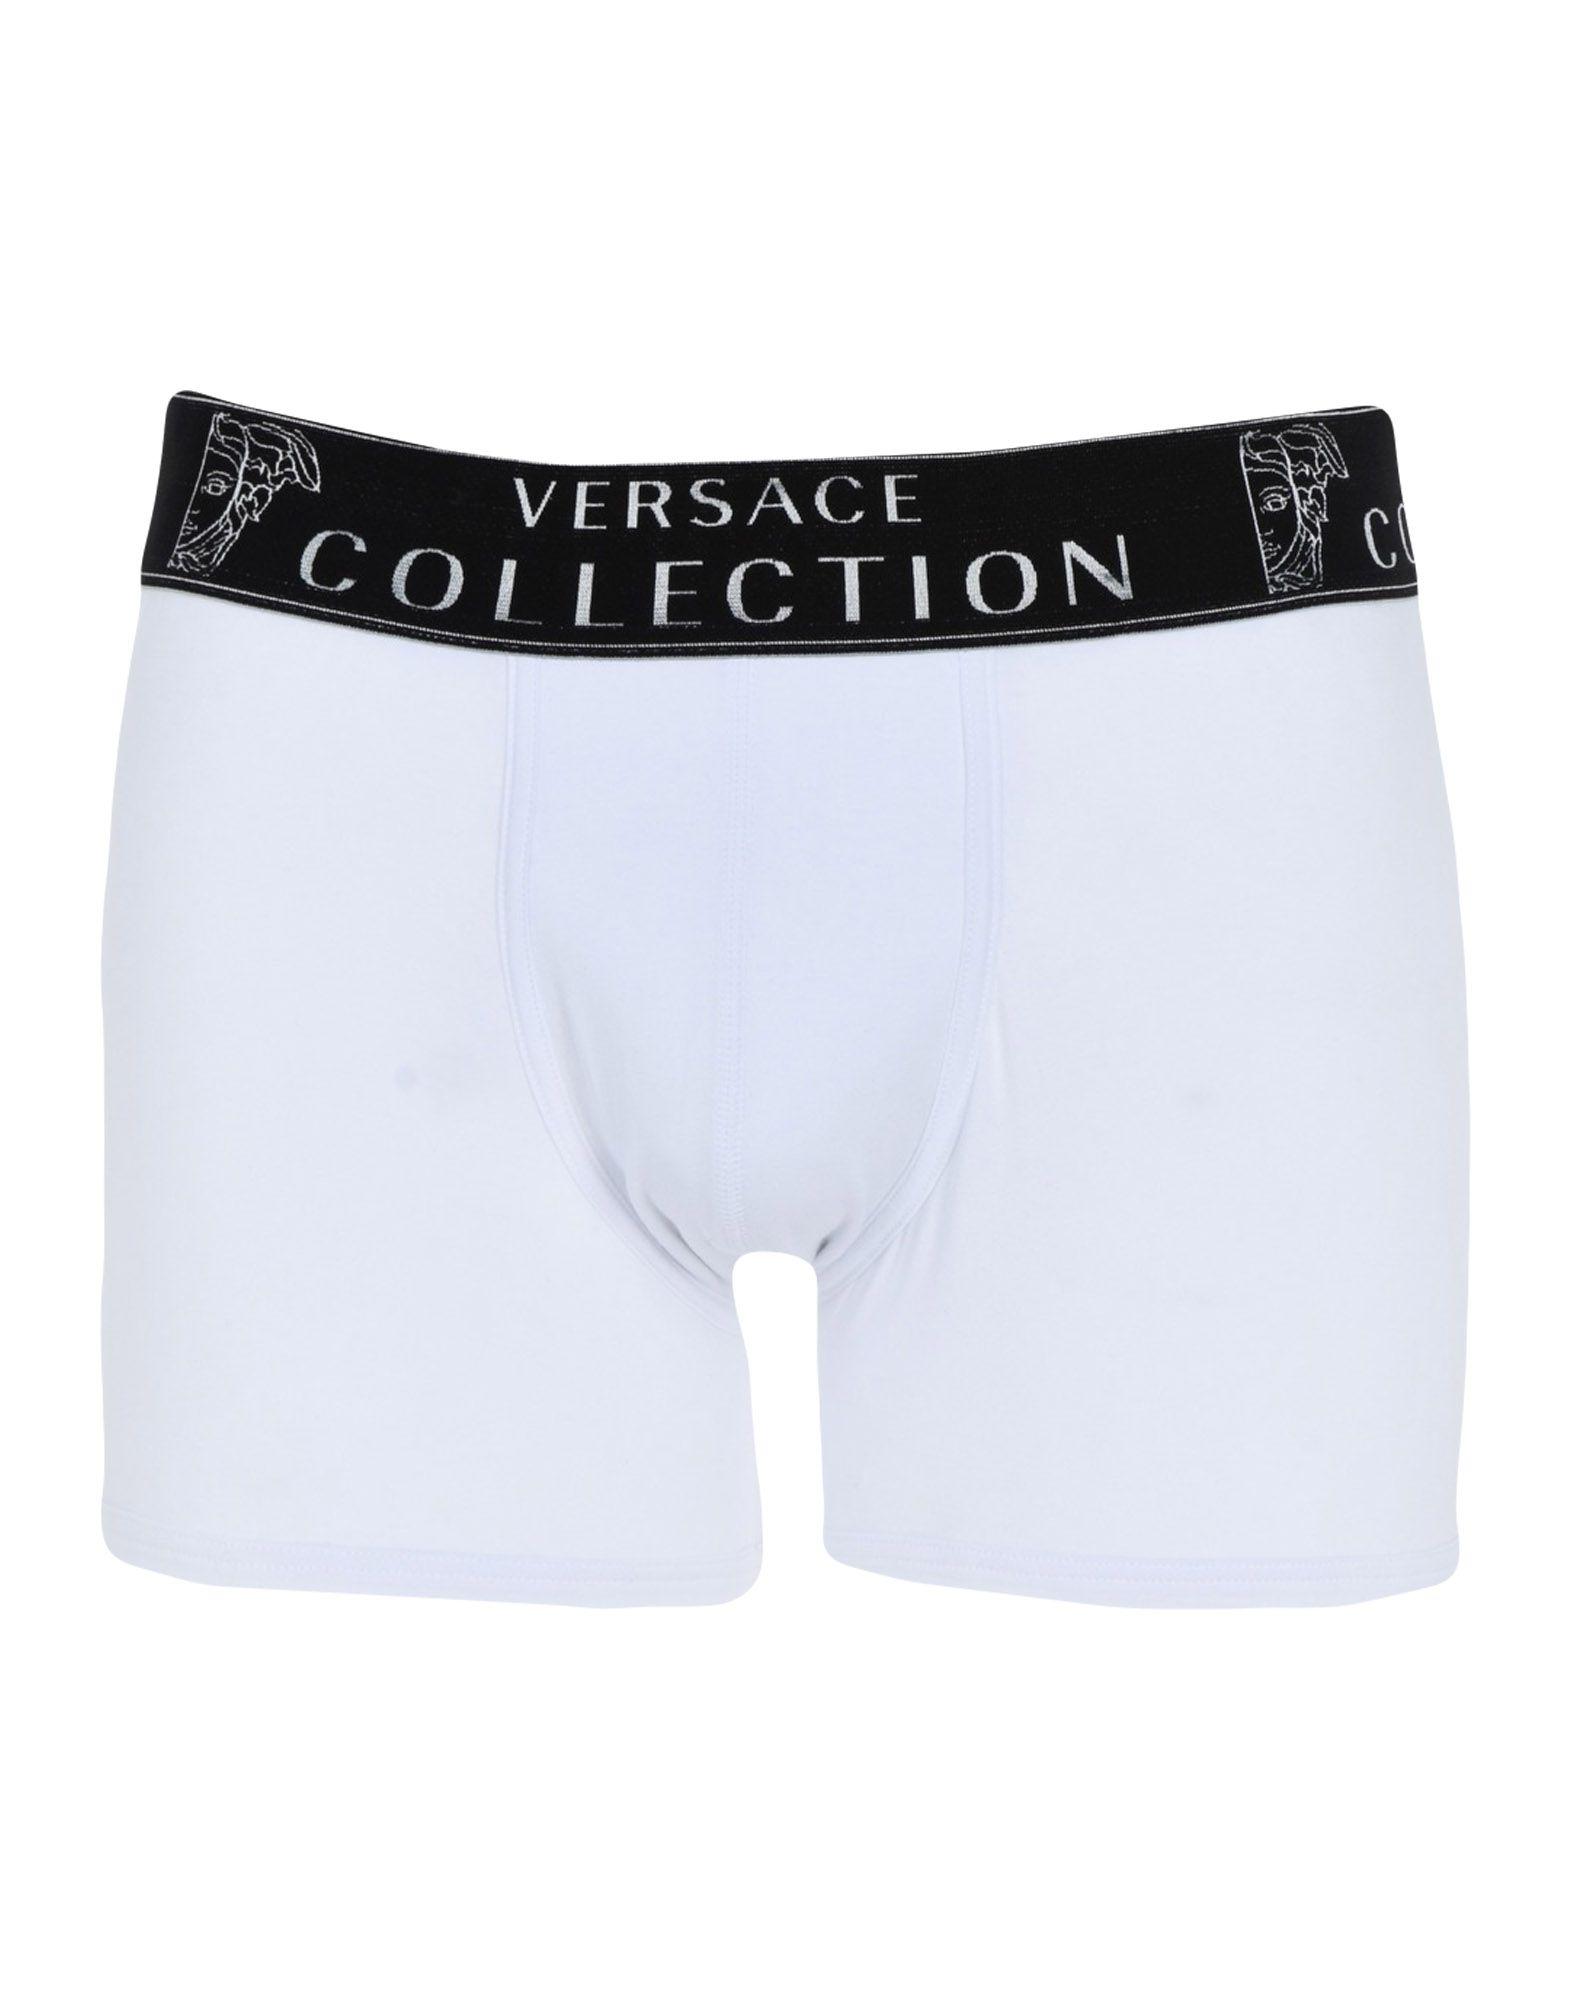 versace collection boxers